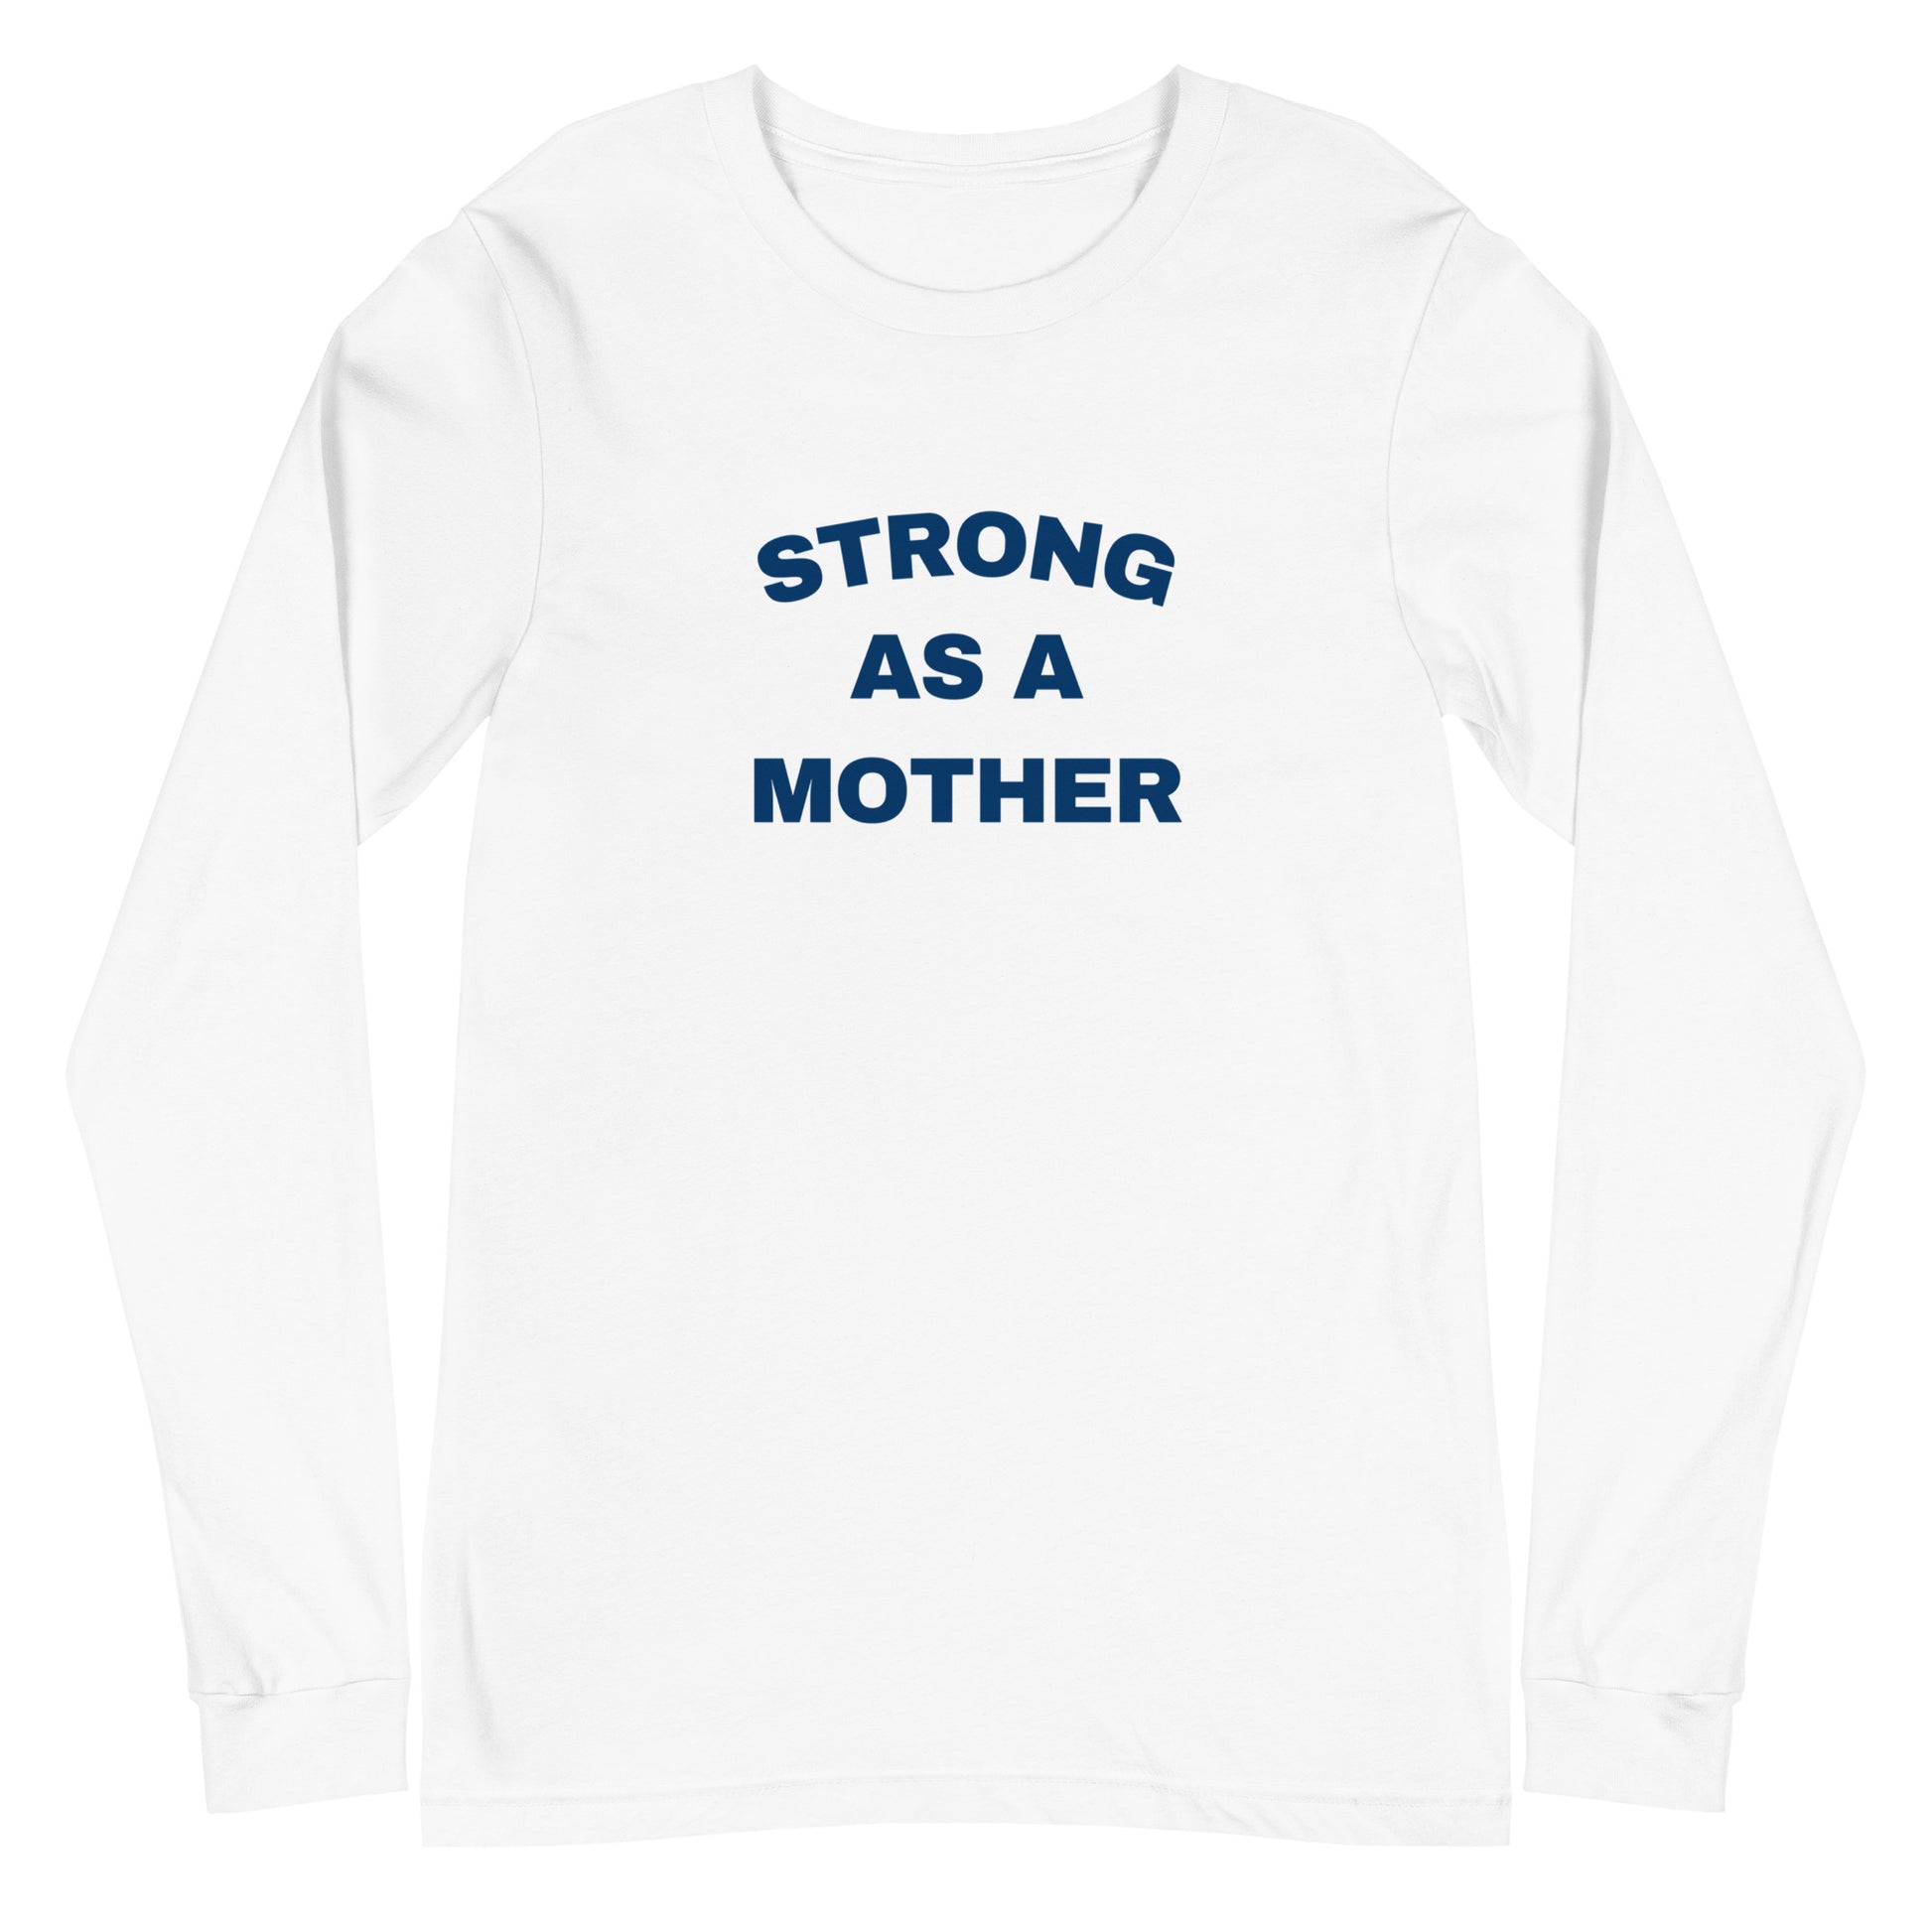 Strong as a Mother Long Sleeve Shirt | Art in Aging